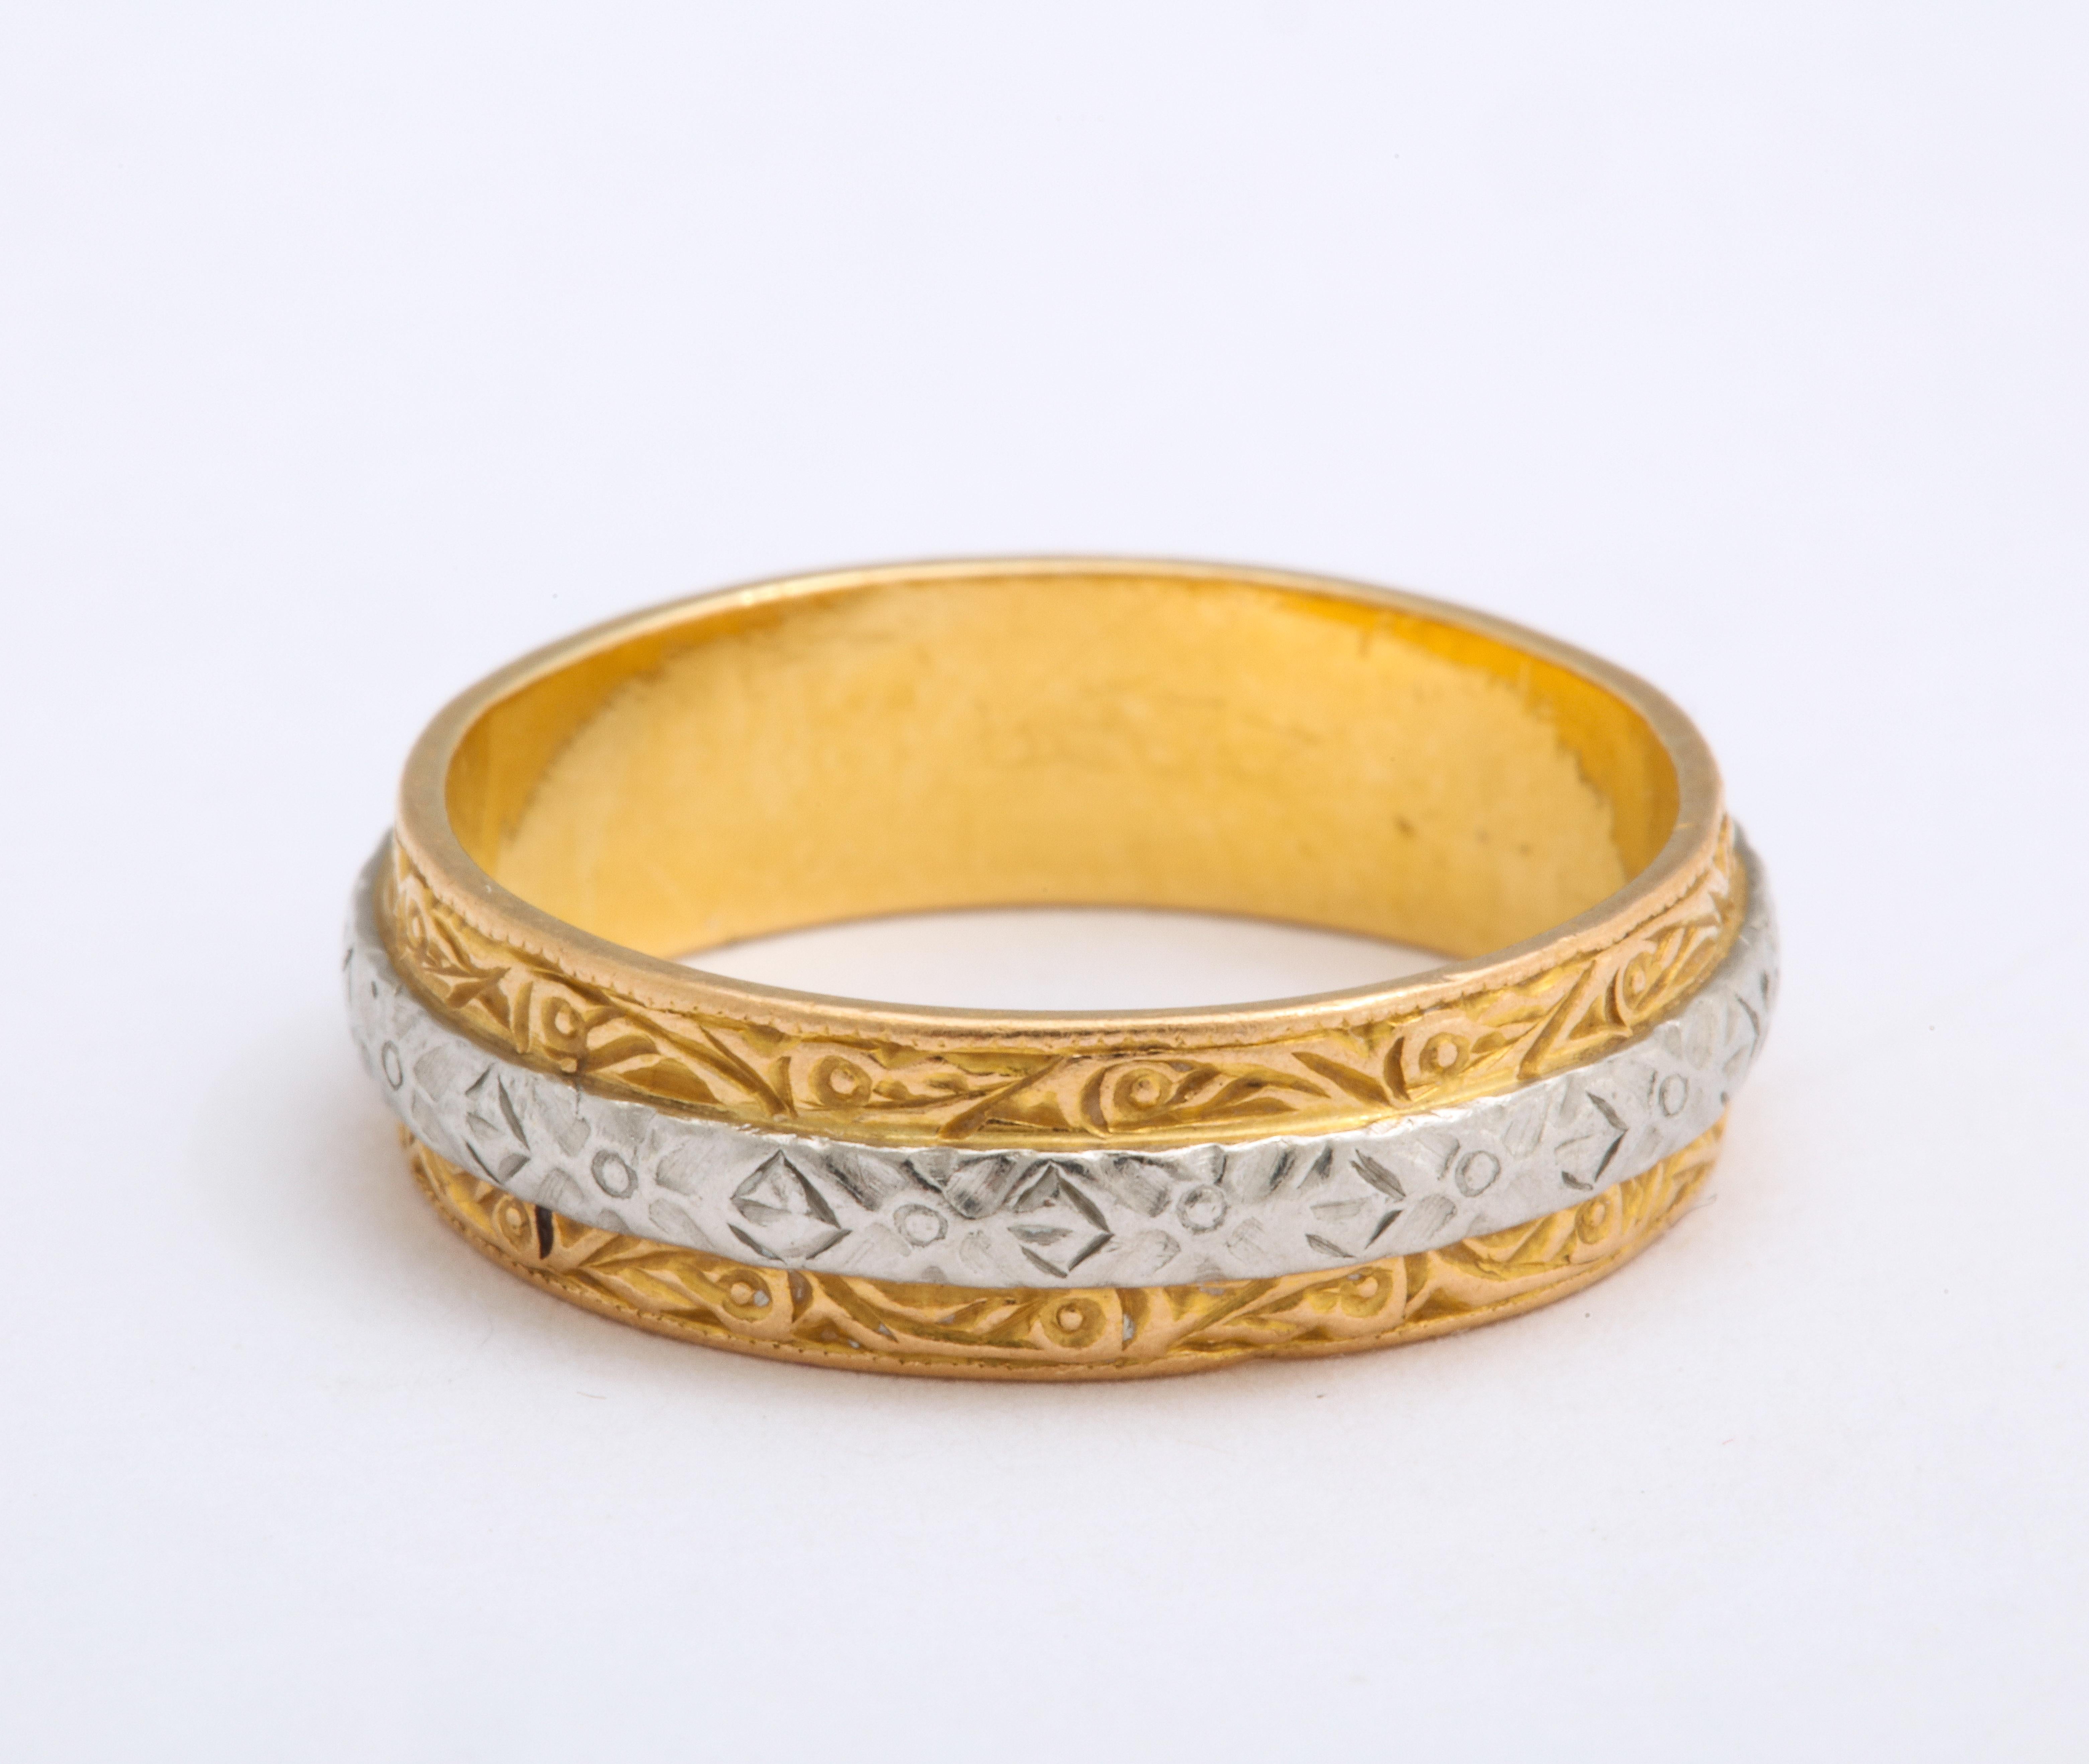 Vintage Midcentury Platinum and Gold Band Ring by Charles Green & Son In Excellent Condition For Sale In Stamford, CT